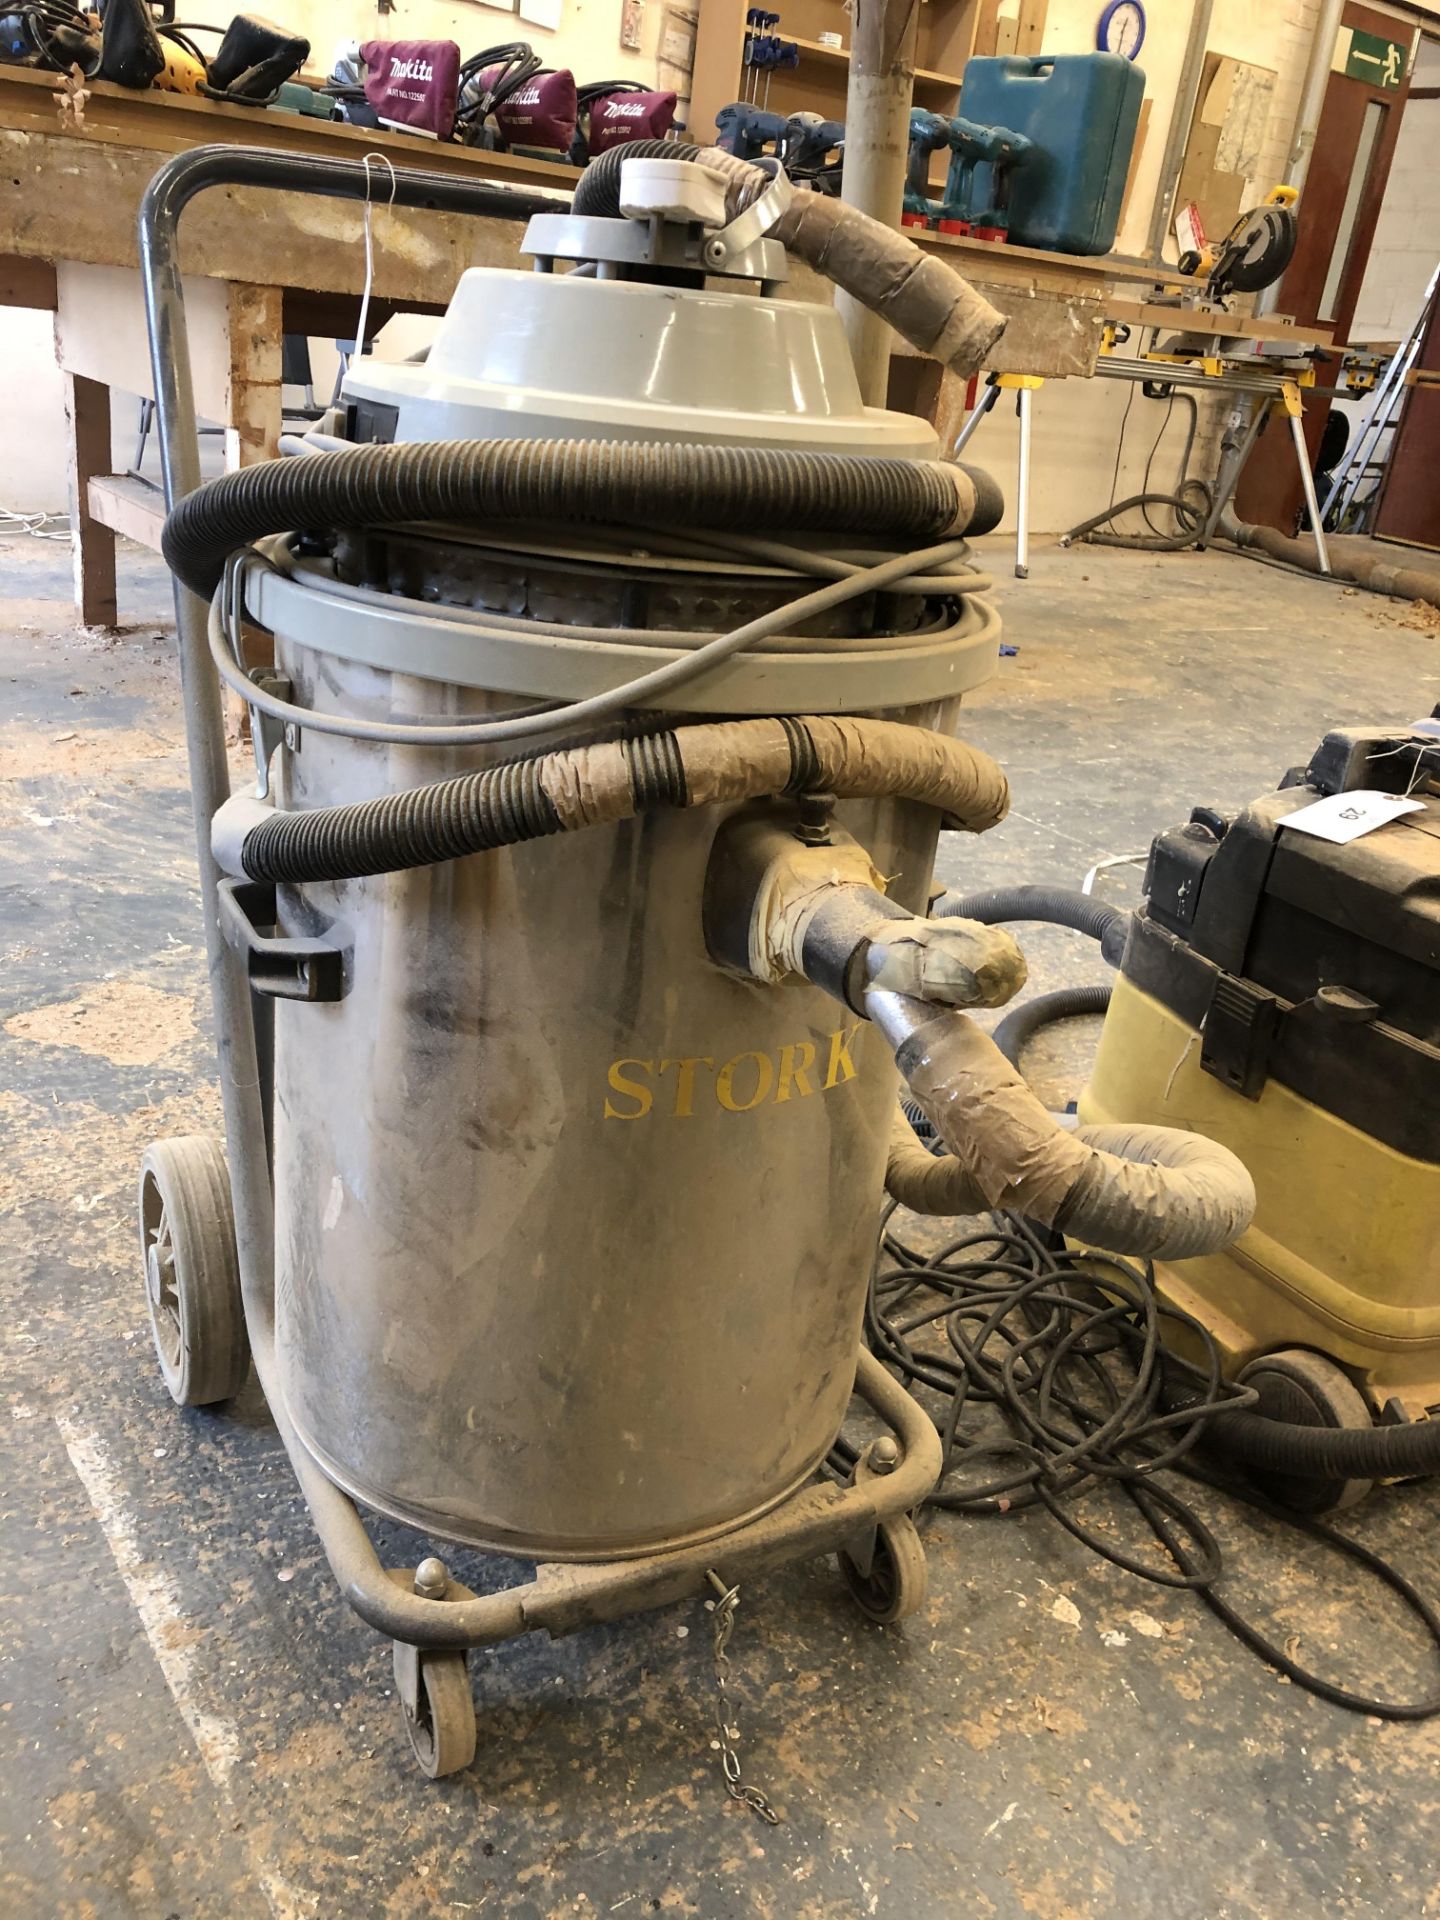 Stork 860 Industrial Wet and Dry Vacuum - Image 2 of 4